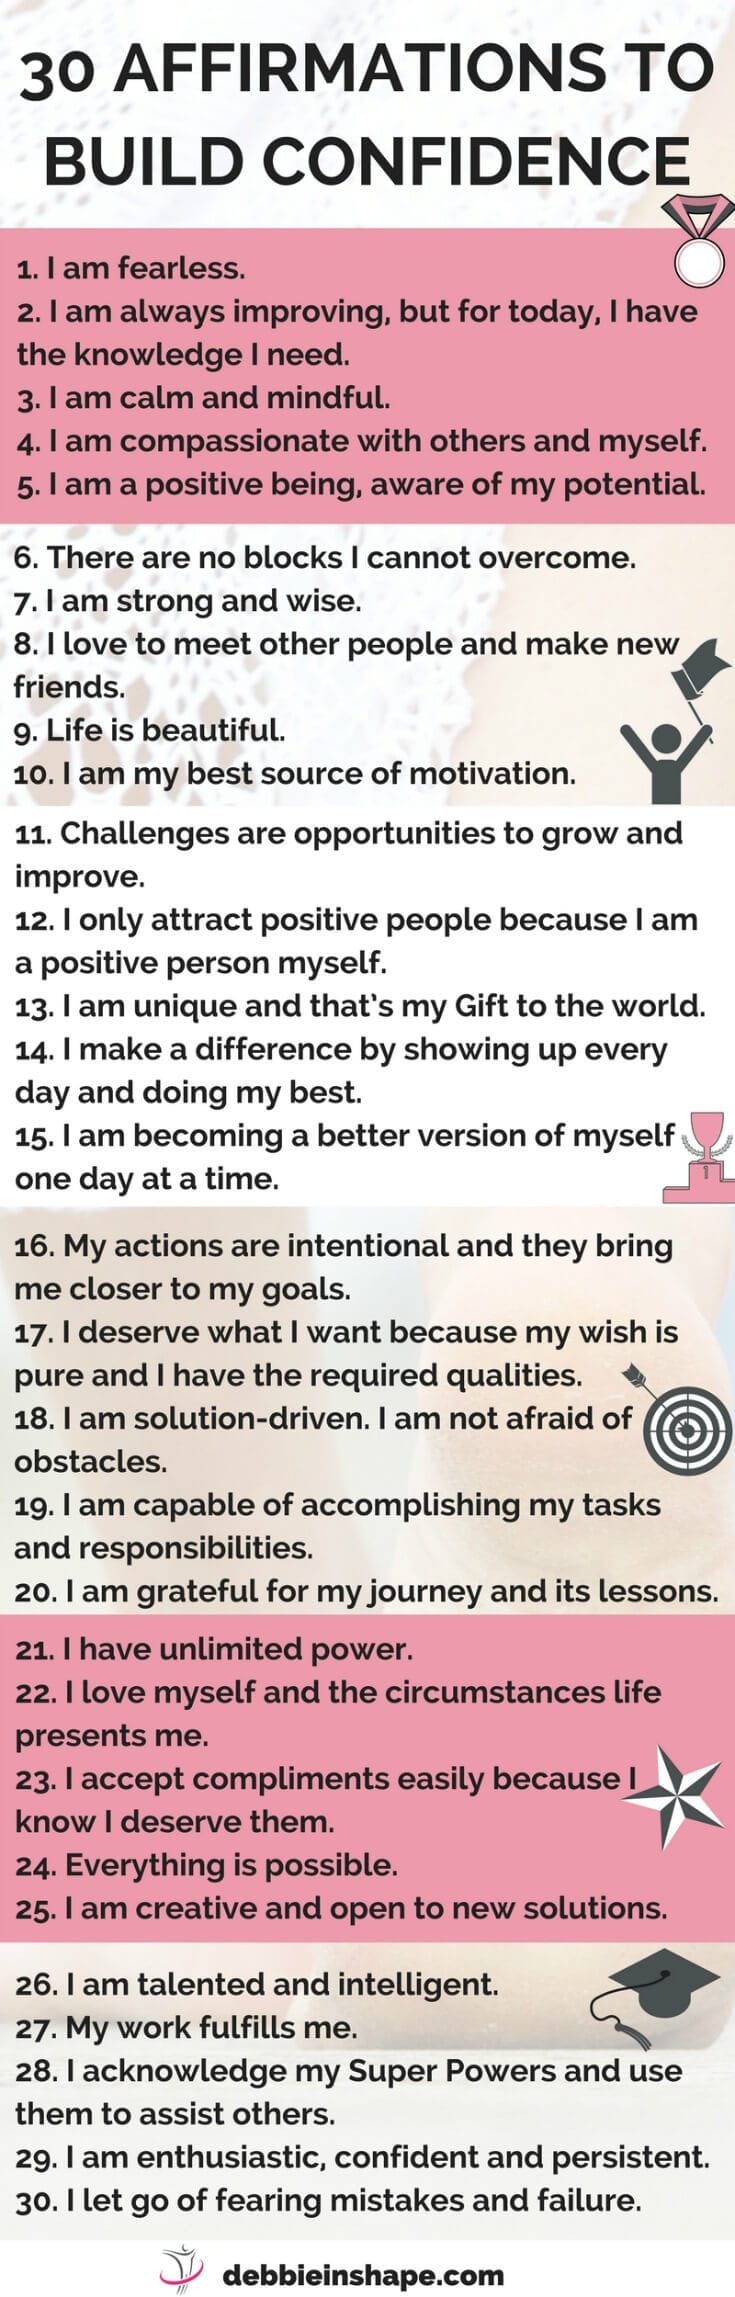 Women for positive affirmations 1001 Affirmations